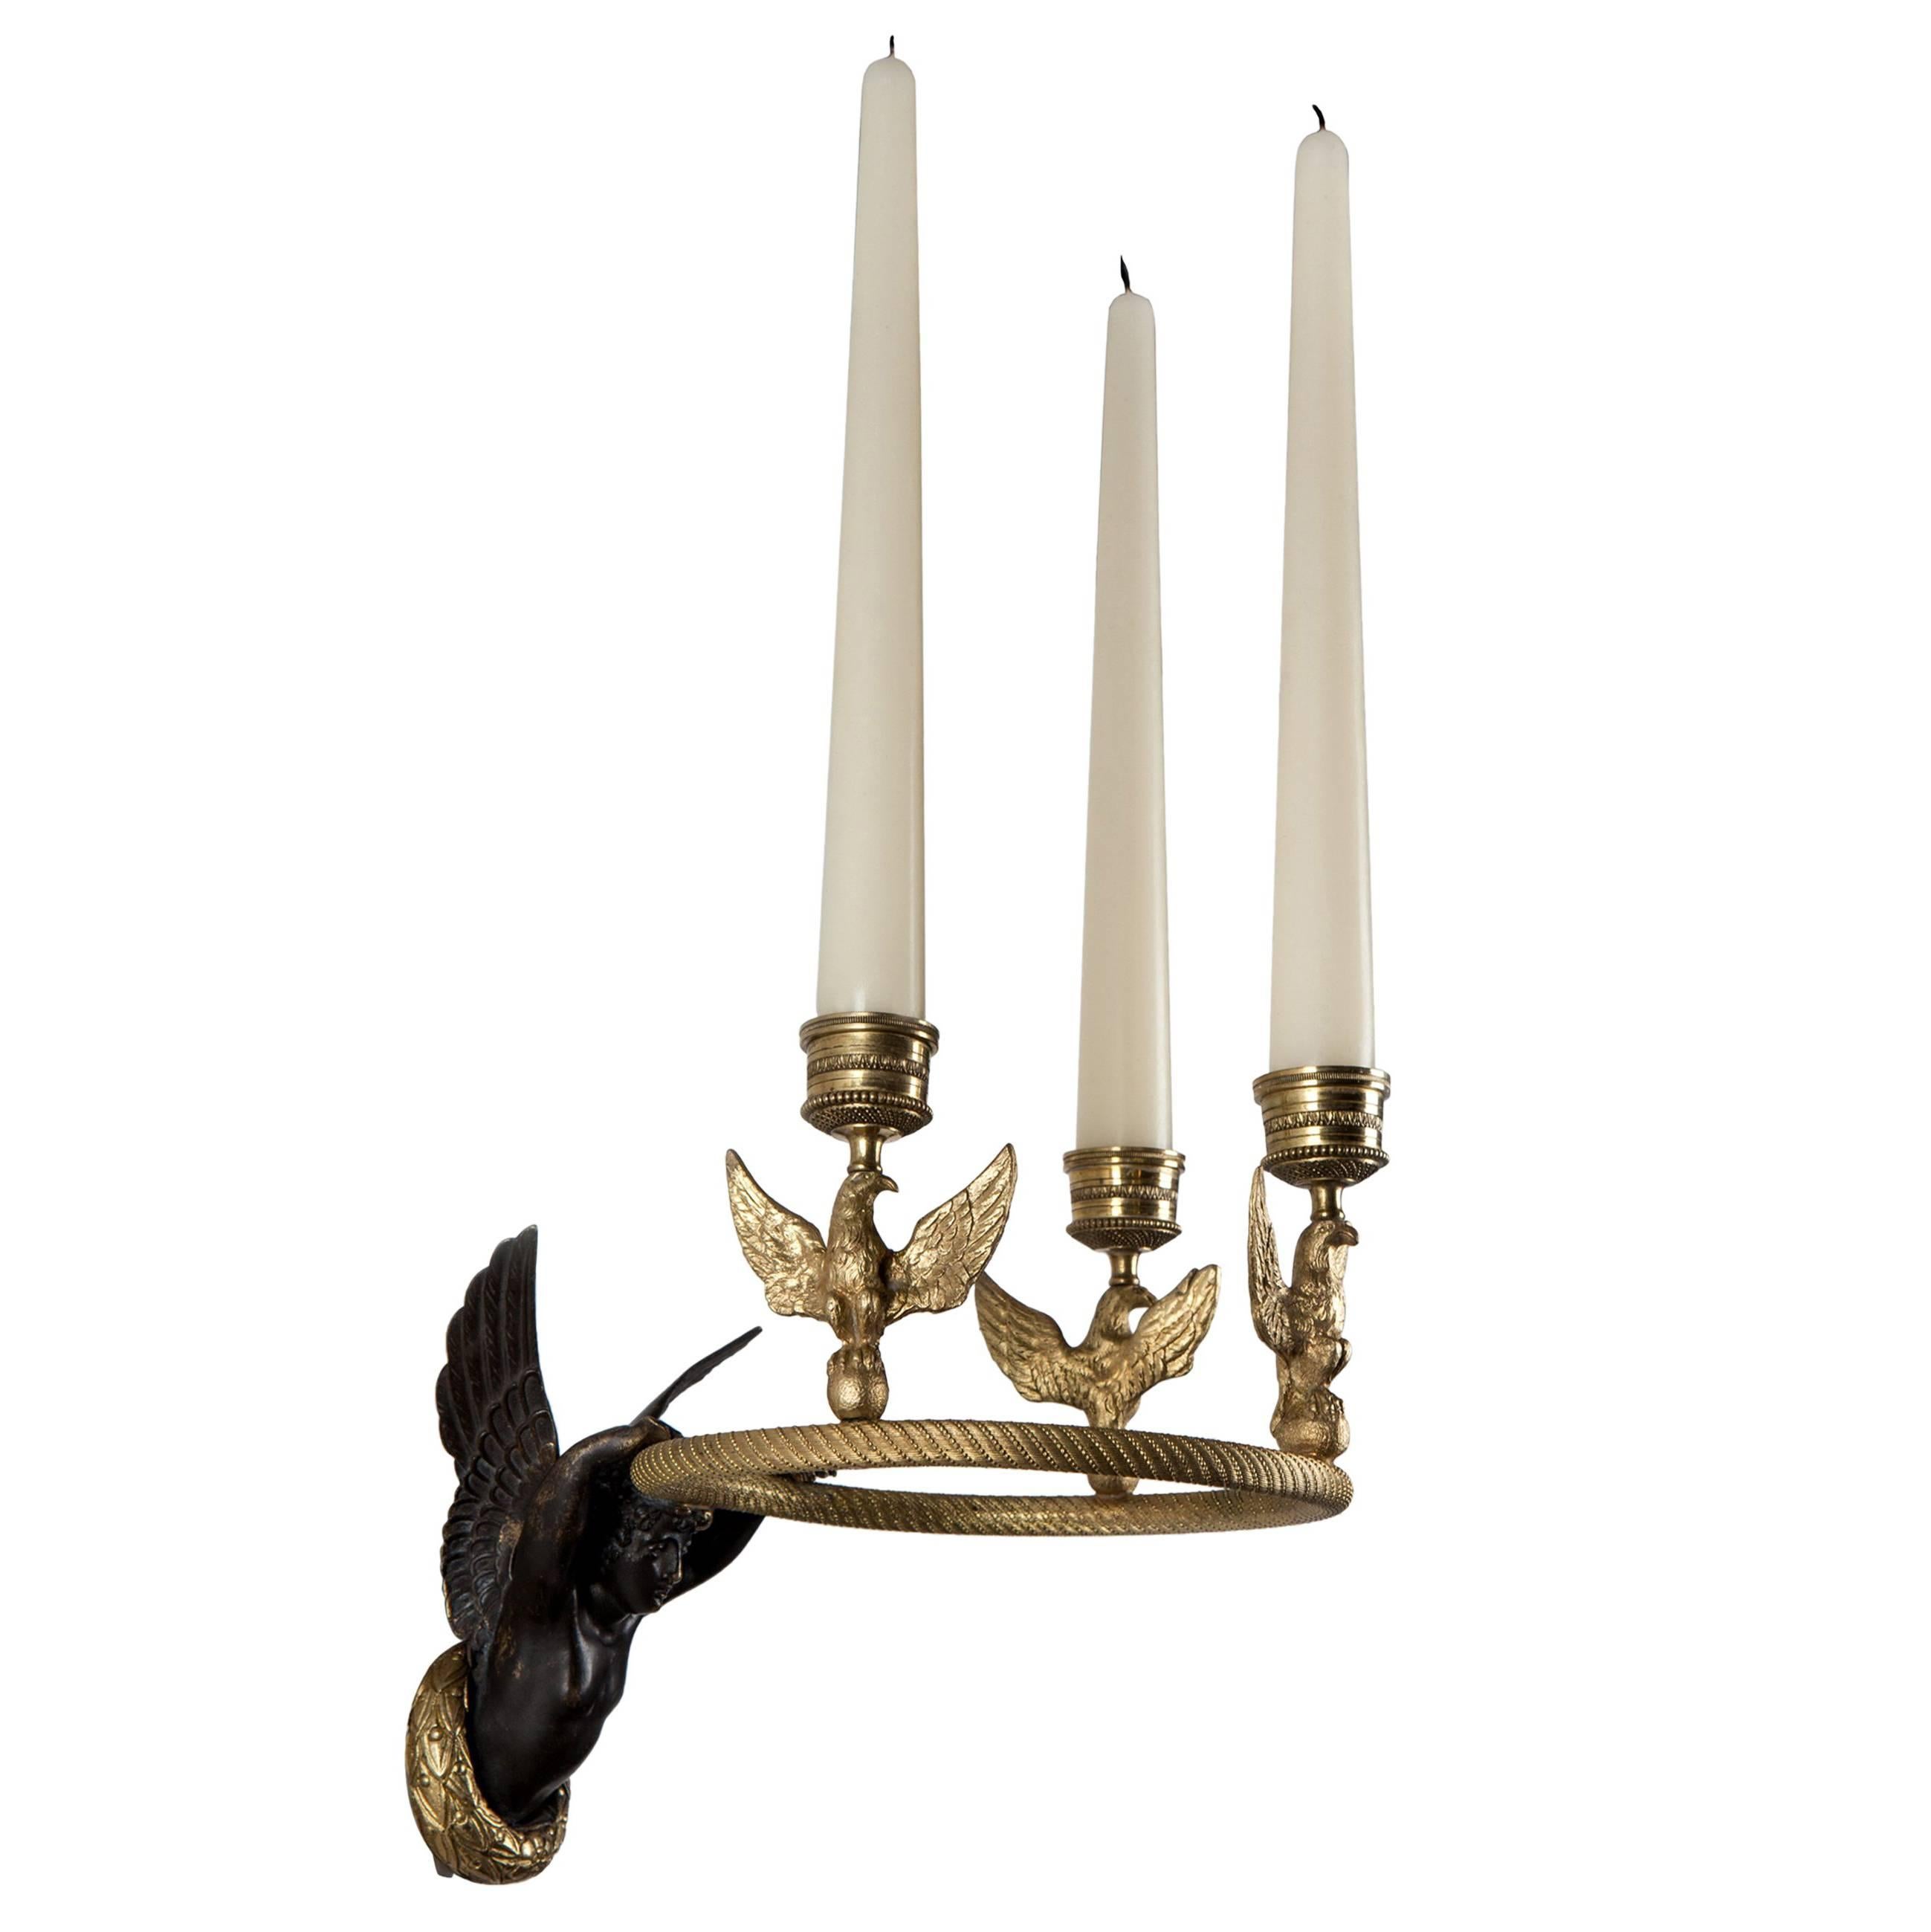 Gilded Empire Hoop Sconce for Candles with Winged Figure and Three Eagles, 1860s For Sale